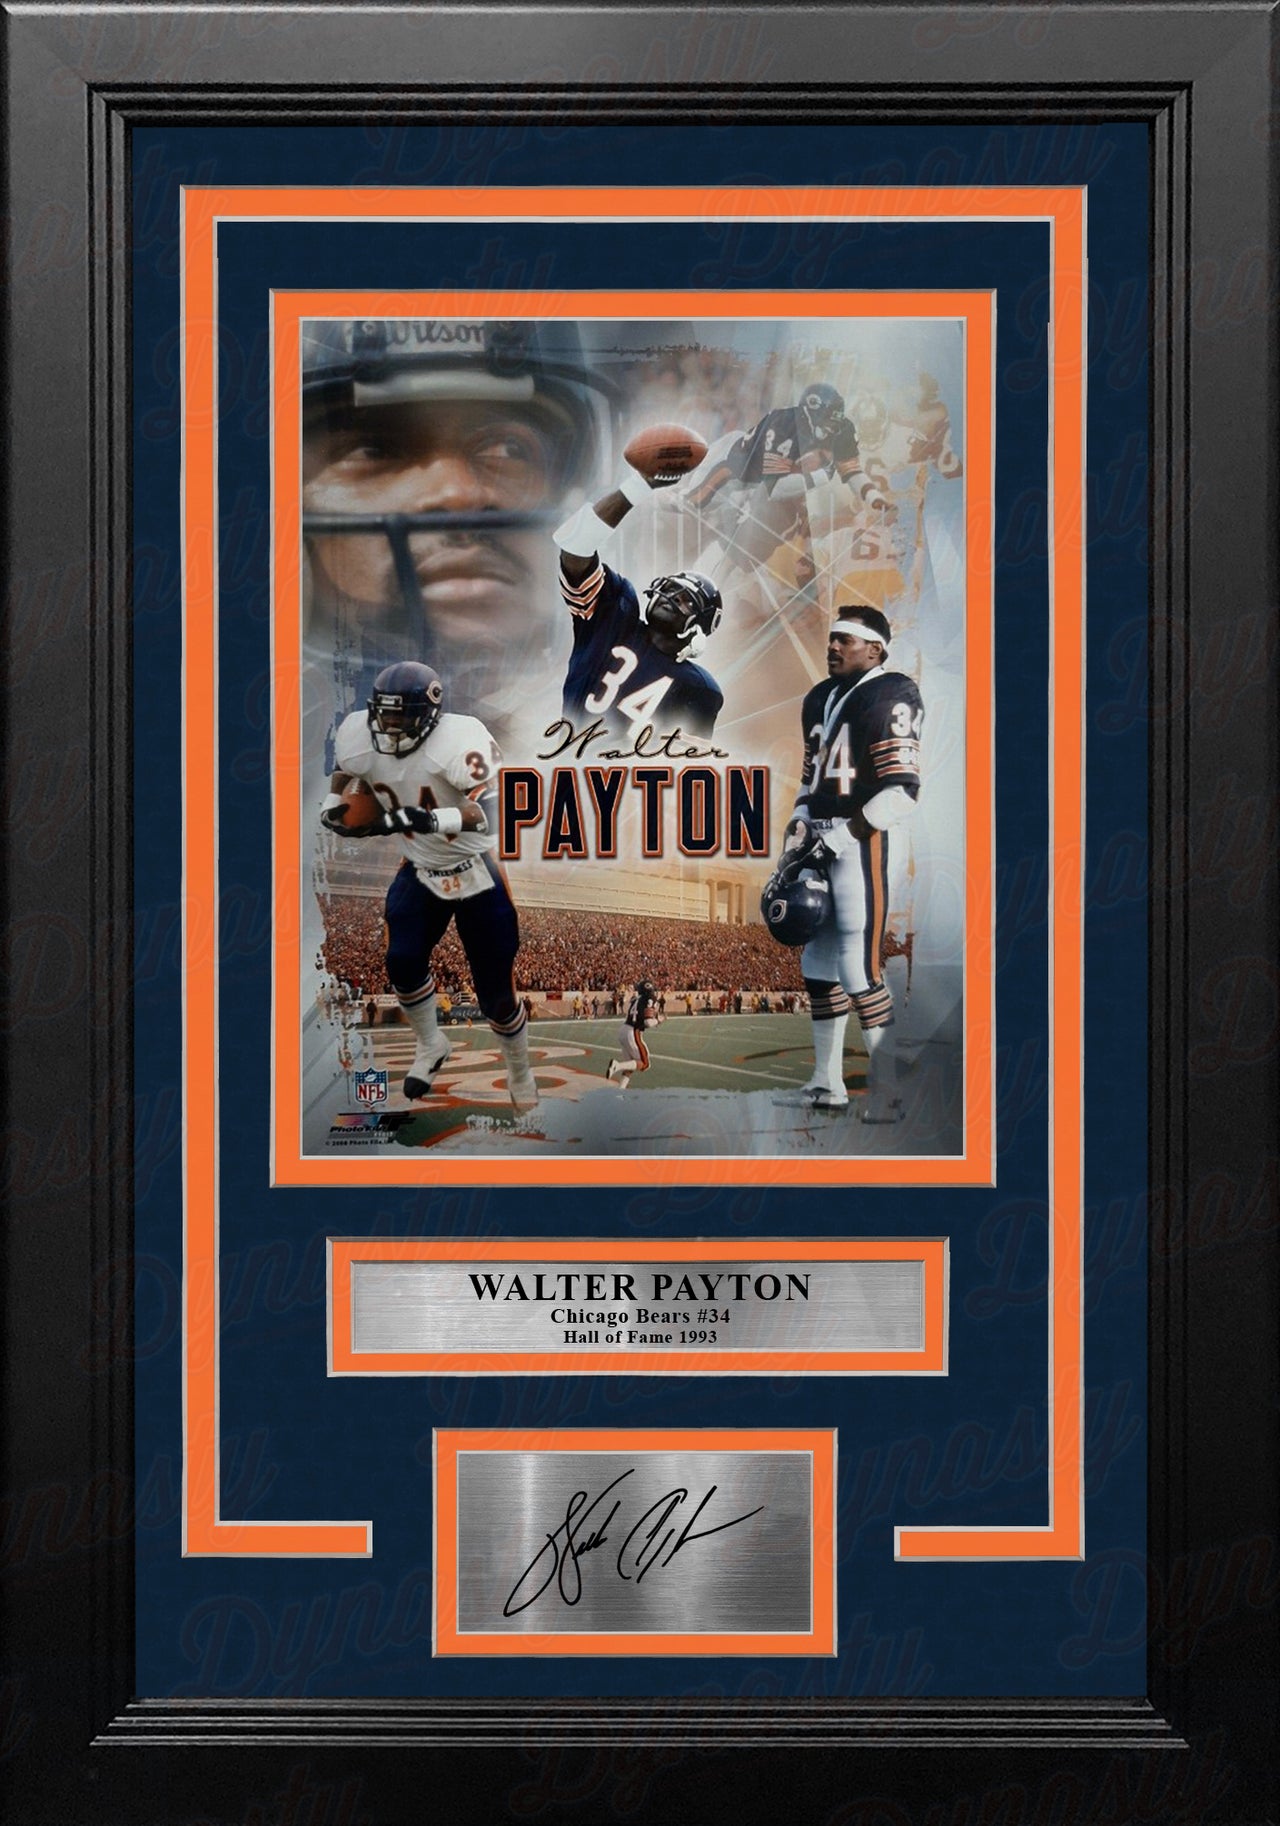 Walter Payton Chicago Bears 8" x 10" Framed Collage Football Photo with Engraved Autograph